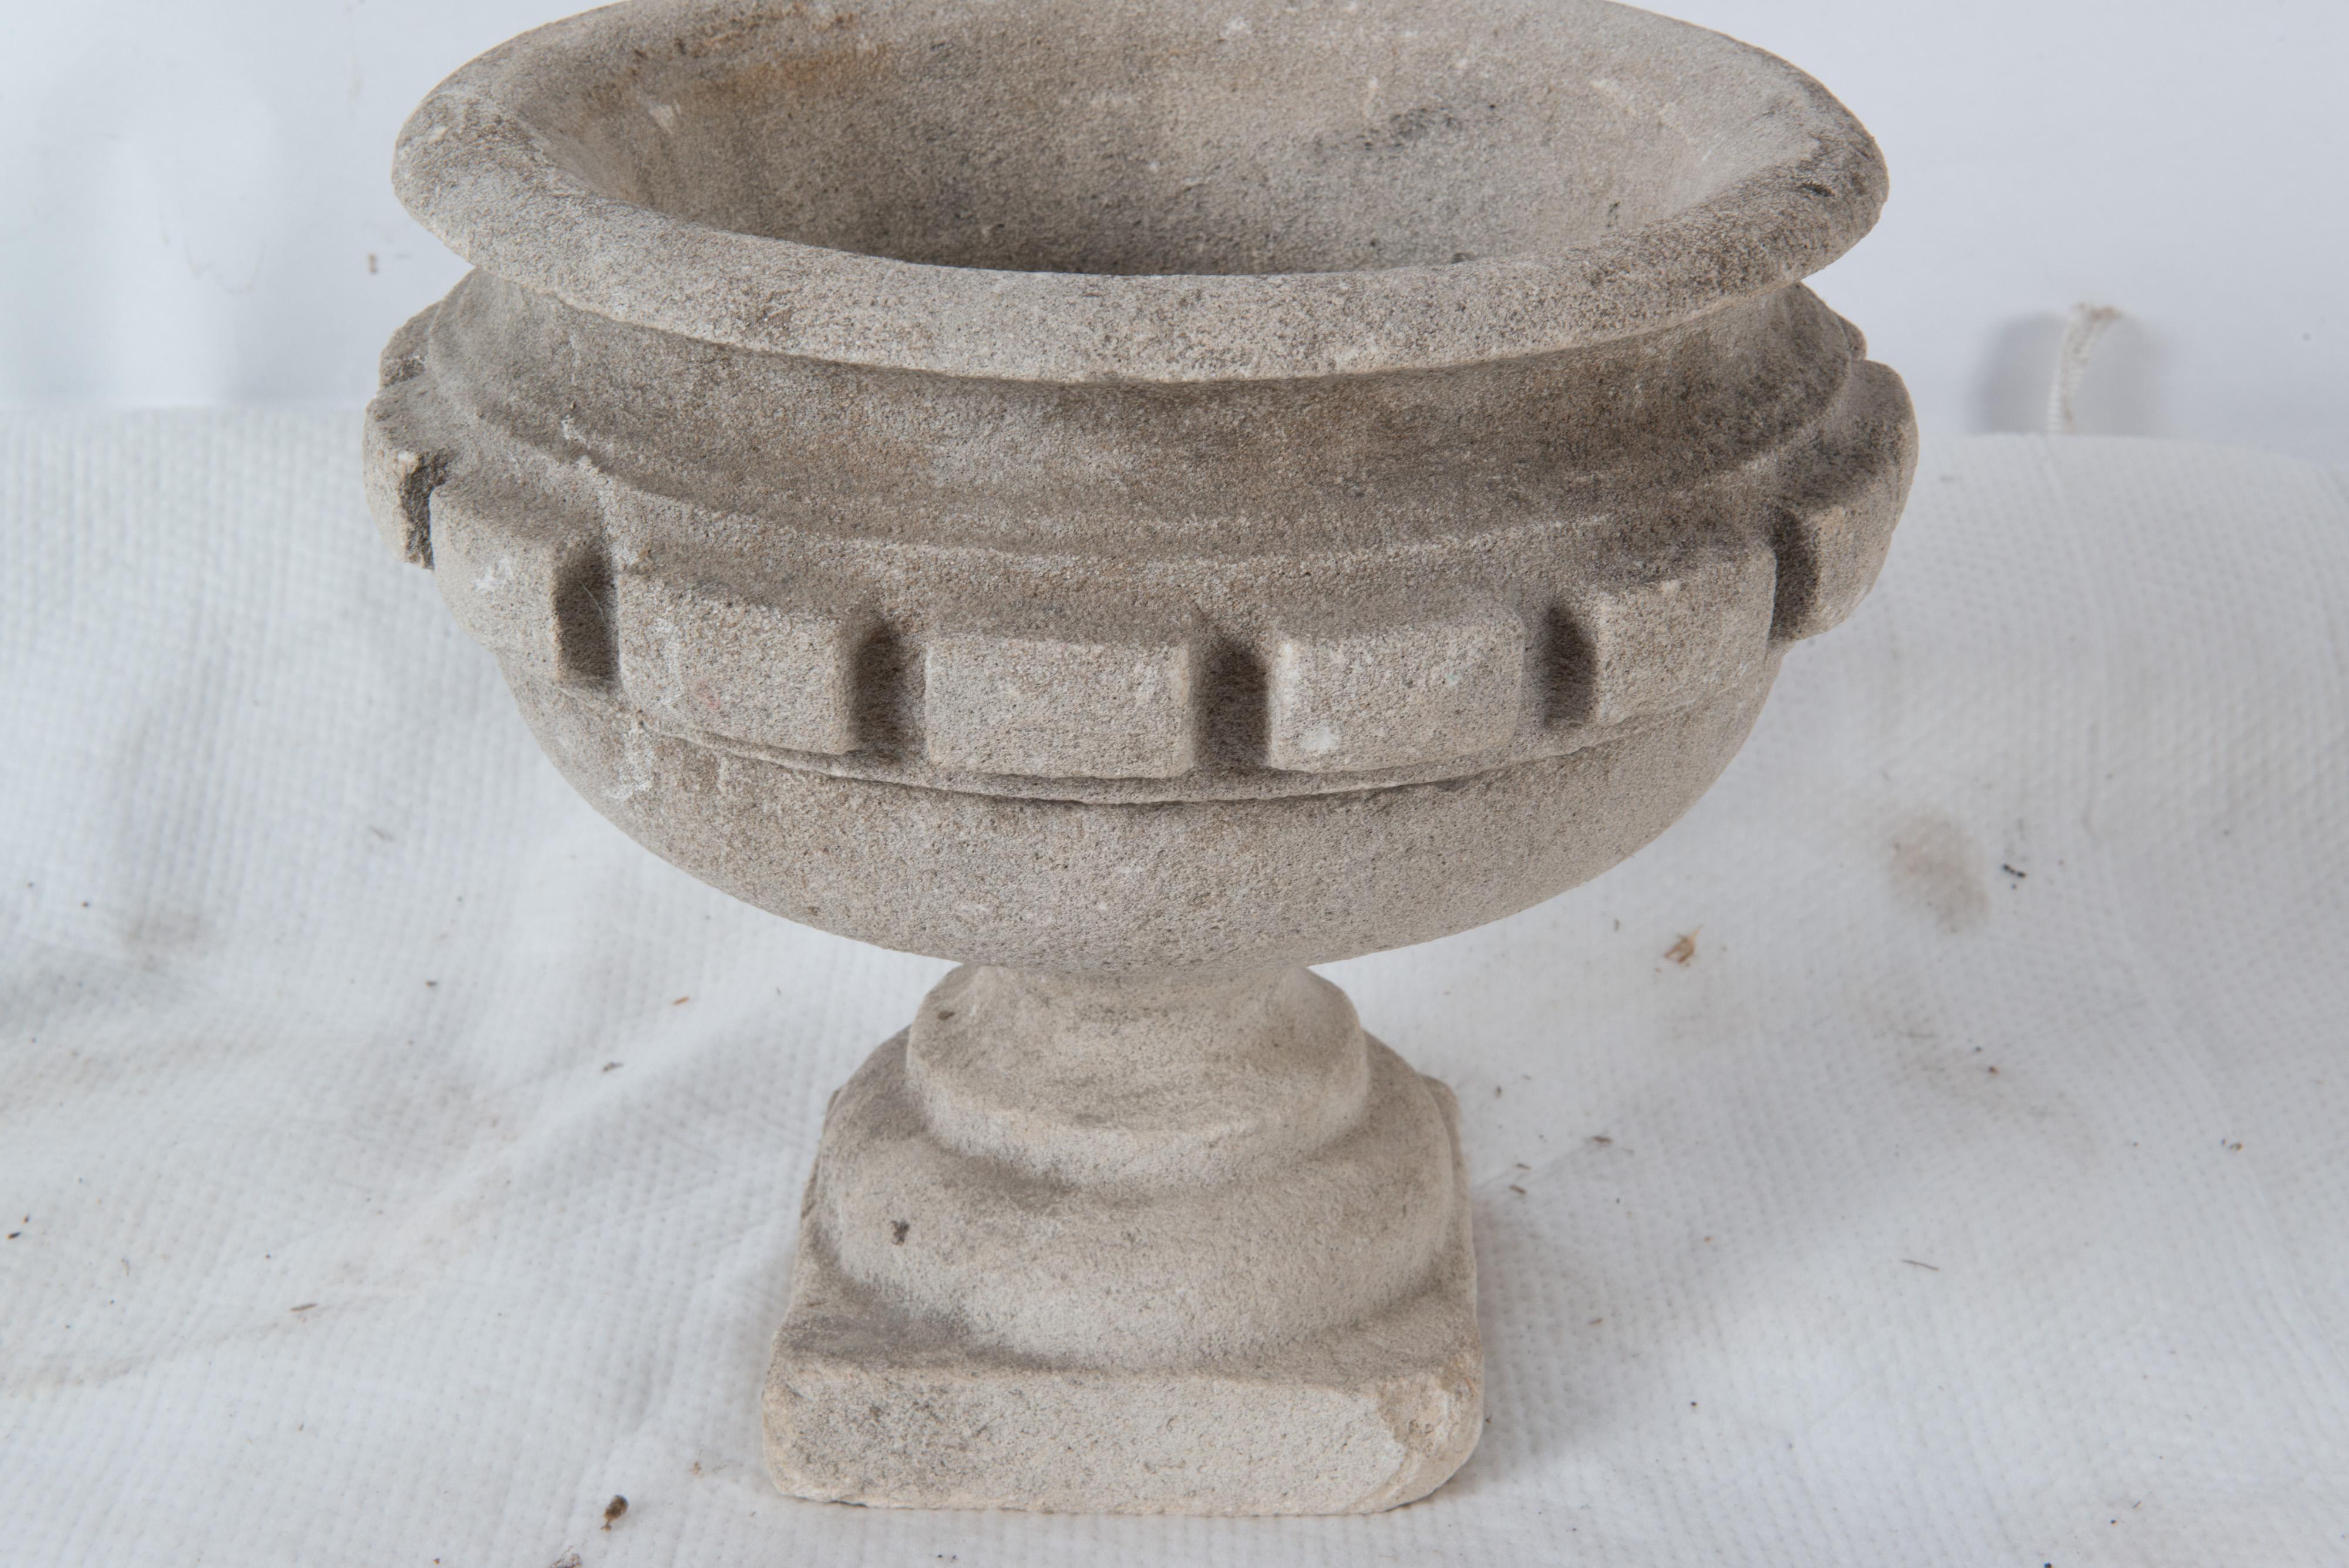 18th century carved stone French garden urn with large dental trim. This is not cast stone. One corner of the square base is missing.